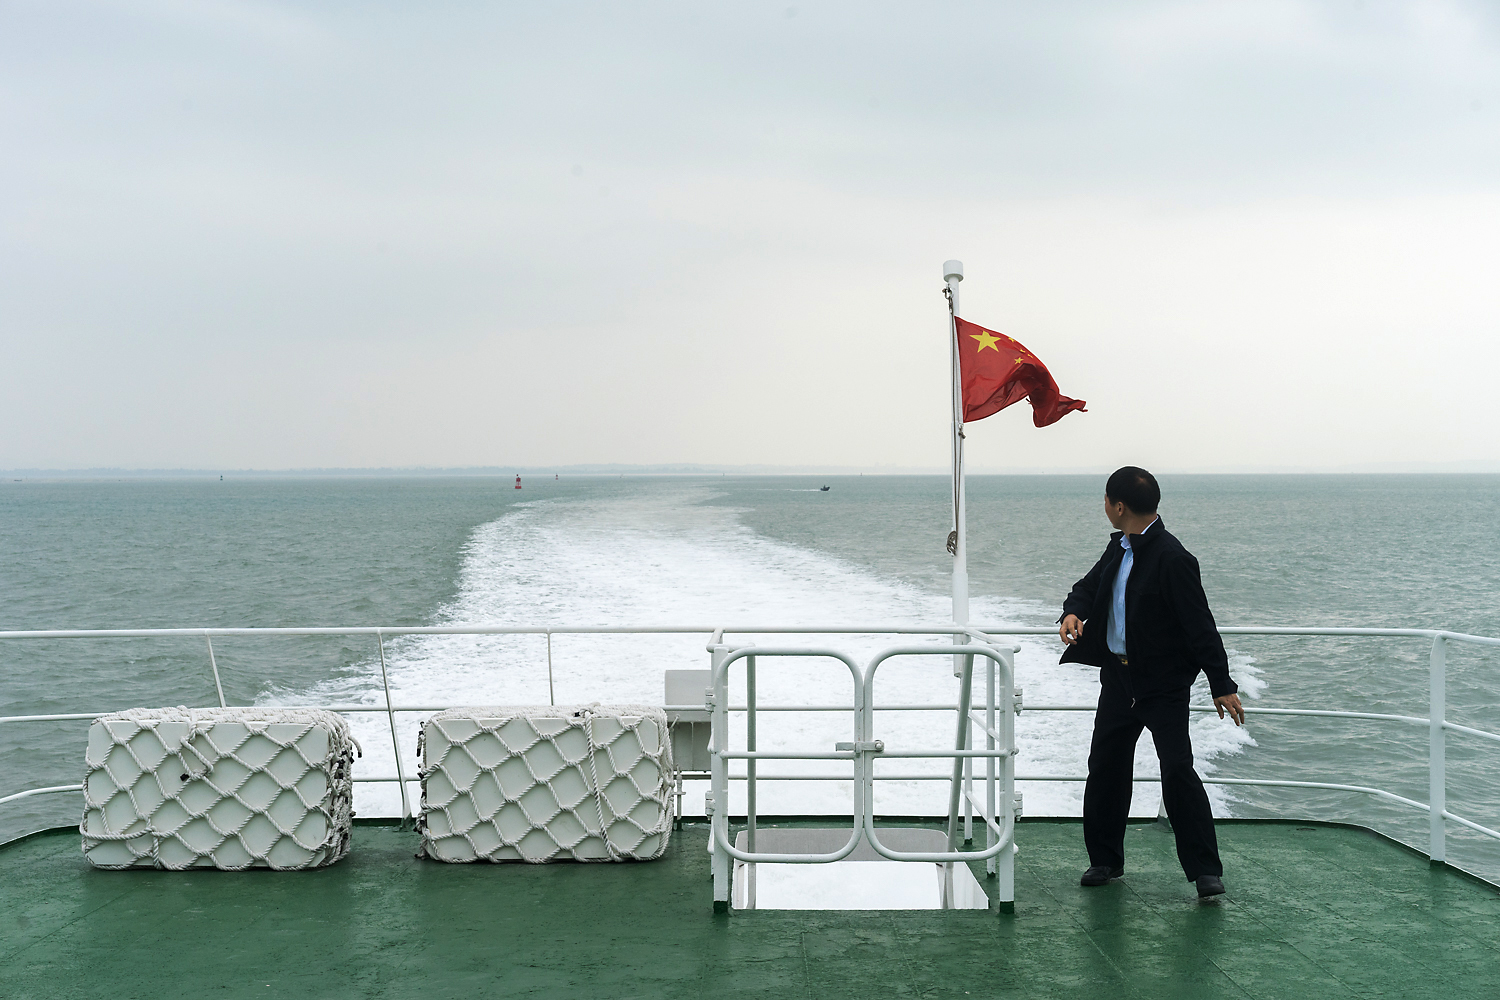 The Chinese flag flies from the stern of a Xiamen-run ferry passing through Chinese waters on a return trip from Kinmen. The ferries that ply the Taiwan Strait are run alternately by Xiamen and Kinmen ships. Although China does not officially recognize Taiwan, and continues to see it as a renegade province, there is an unwritten understanding between the ferry companies on both sides. The Chinese and Taiwanese flags are lowered at the midway point and flown again only when the ships are back in their respective territories.